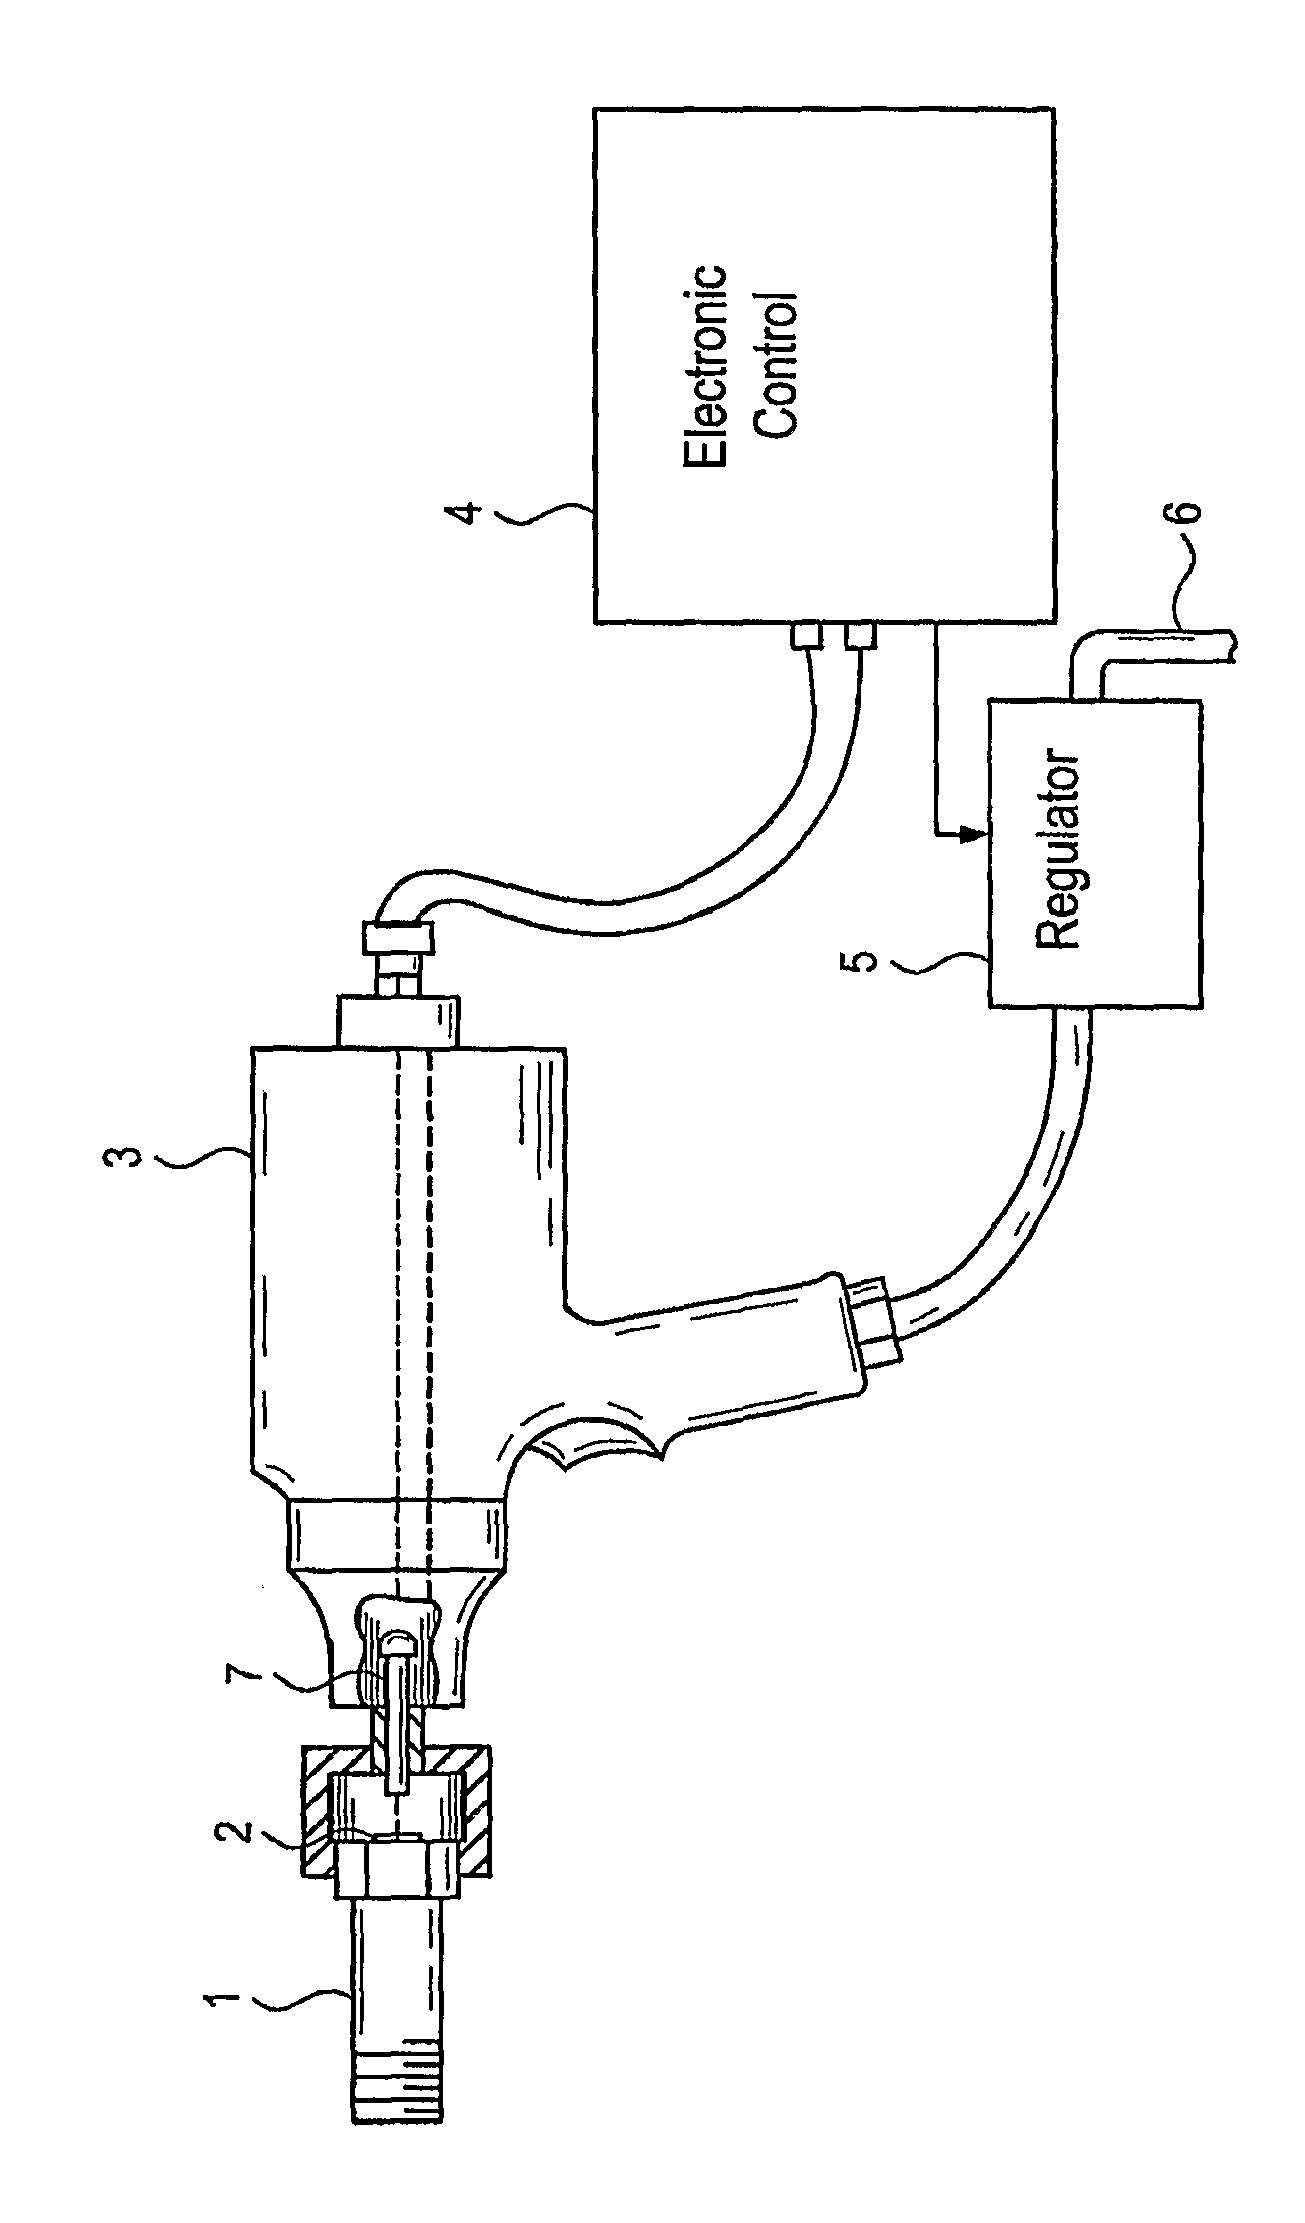 System for Dynamically Controlling the Torque Output of a Pneumatic Tool